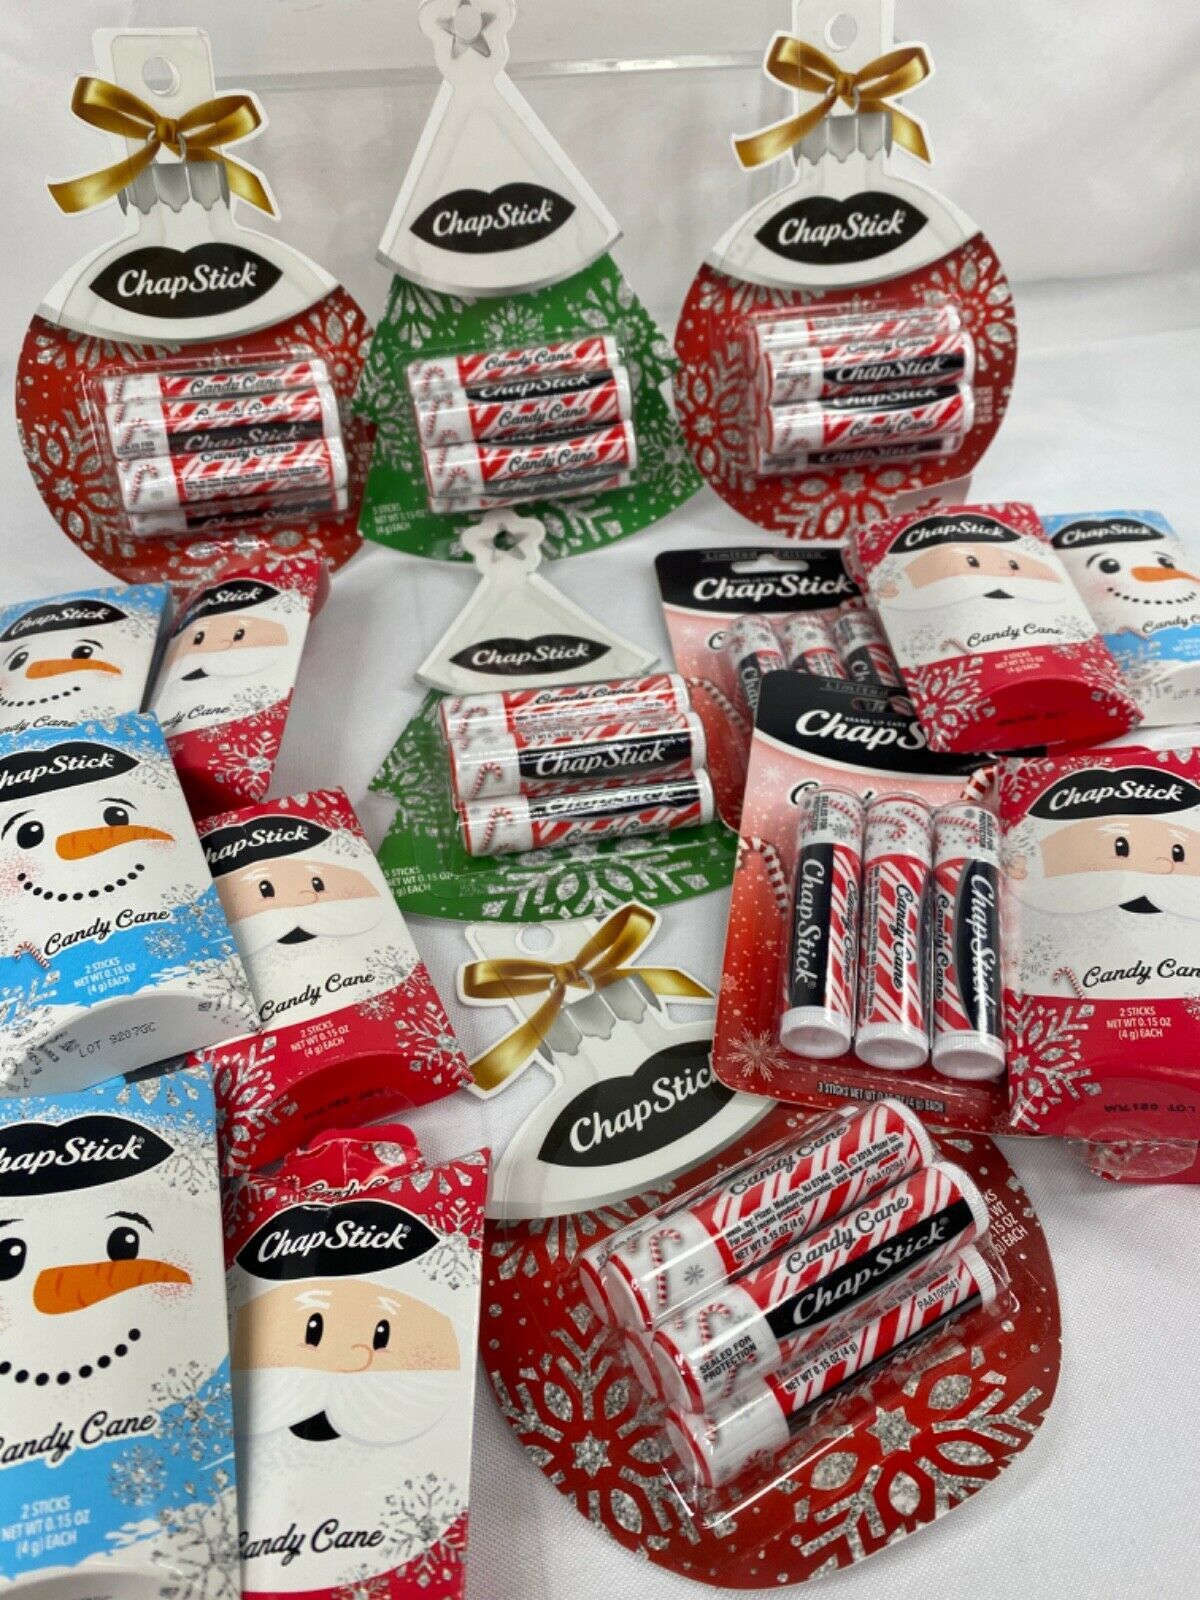 ChapStick Holiday Candy Cane Gift Set YOU CHOOSE Buy More Save +Combine Shipping - £2.33 GBP - £3.90 GBP